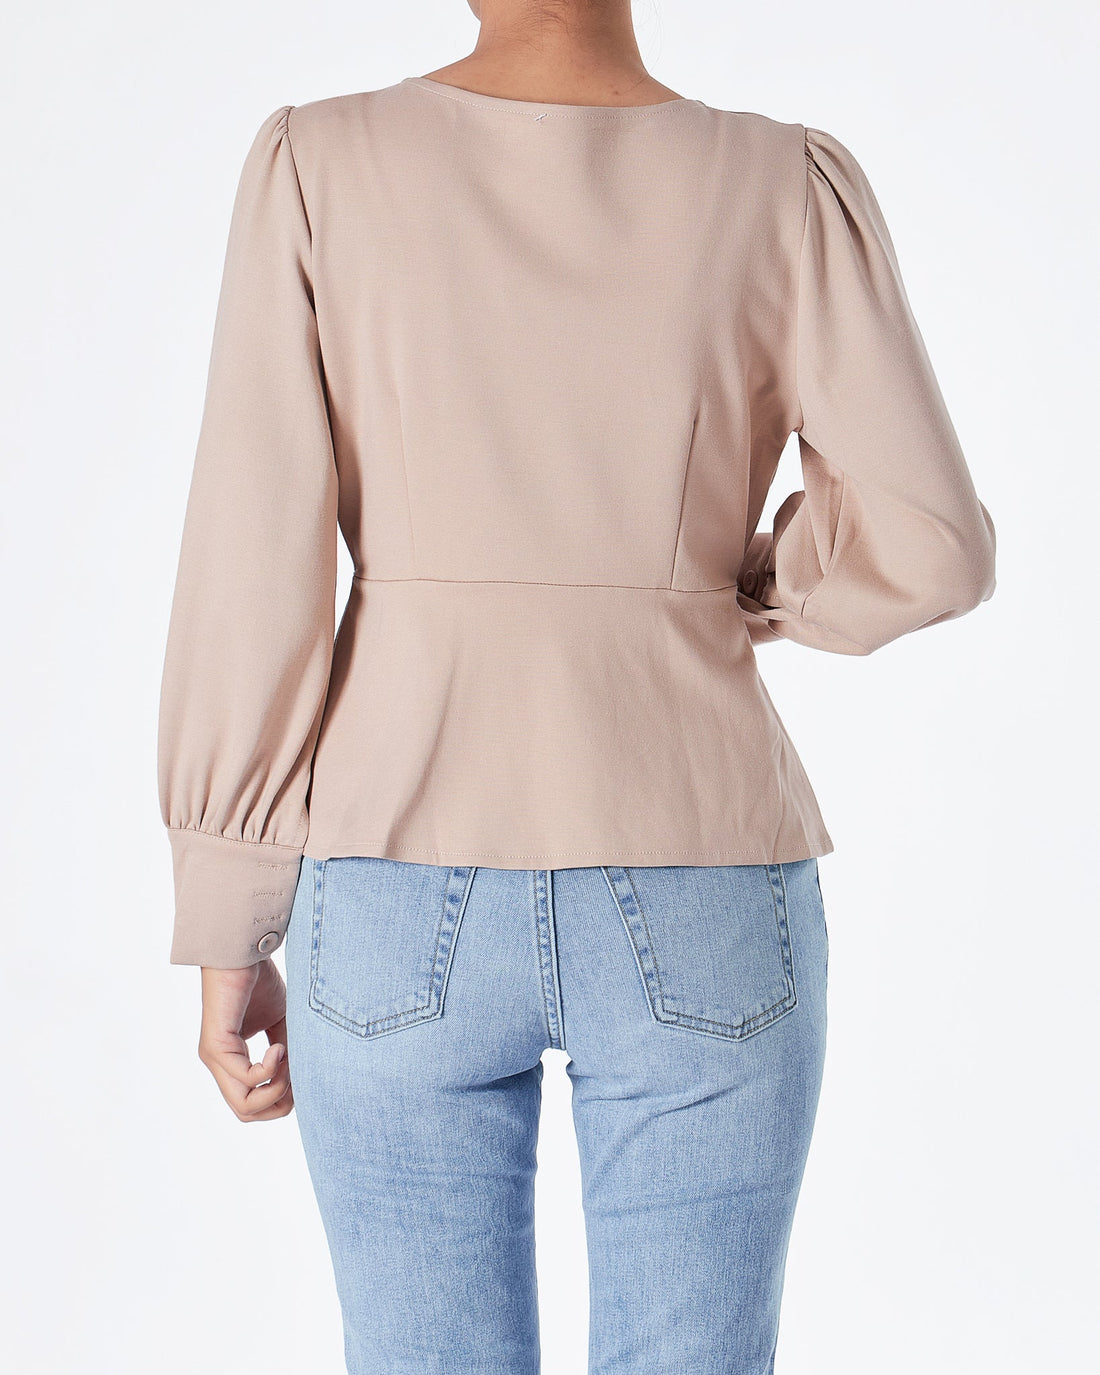 MOI OUTFIT-Puff Sleeve Lady Blazer 20.90